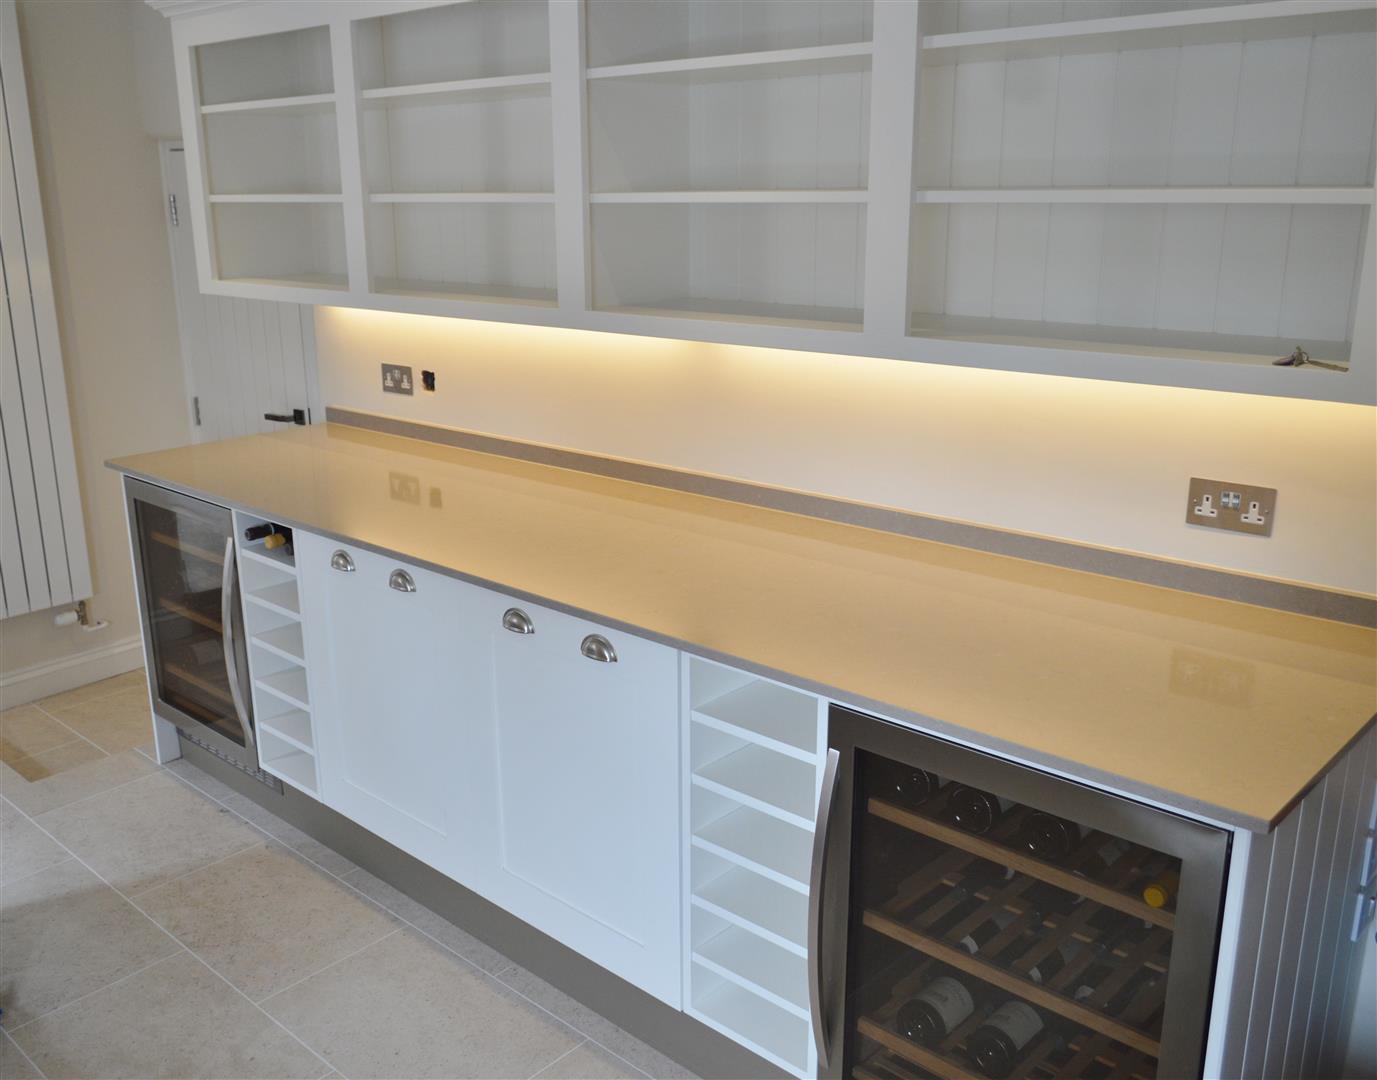 Redbrook kitchens design and install bespoke kitchens in Gloucestershire Large open top with drinks centre below